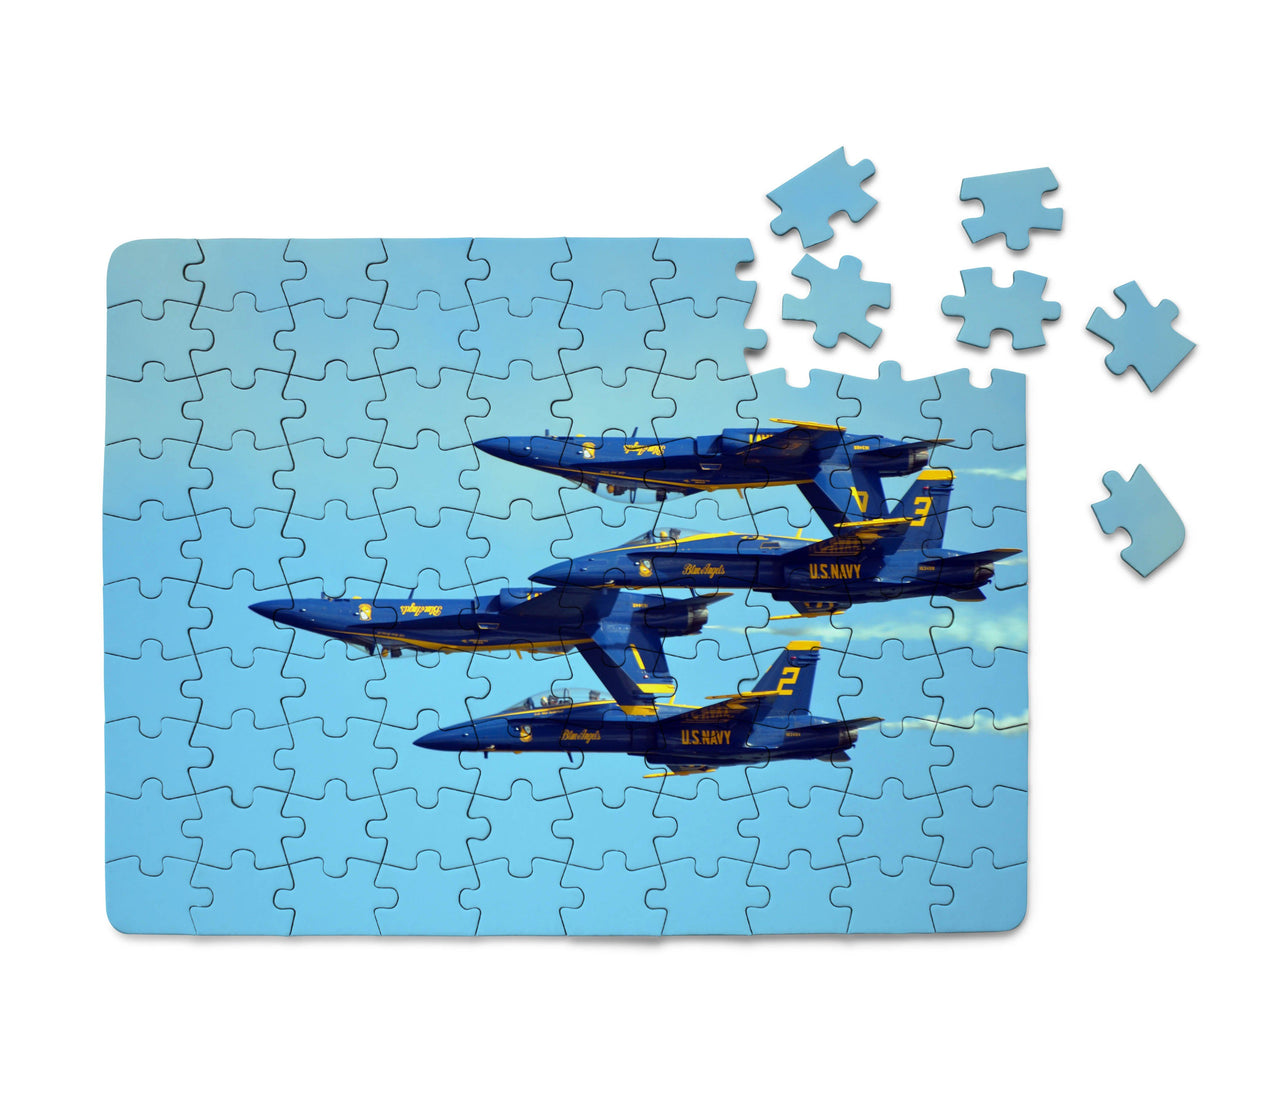 US Navy Blue Angels Printed Puzzles Aviation Shop 